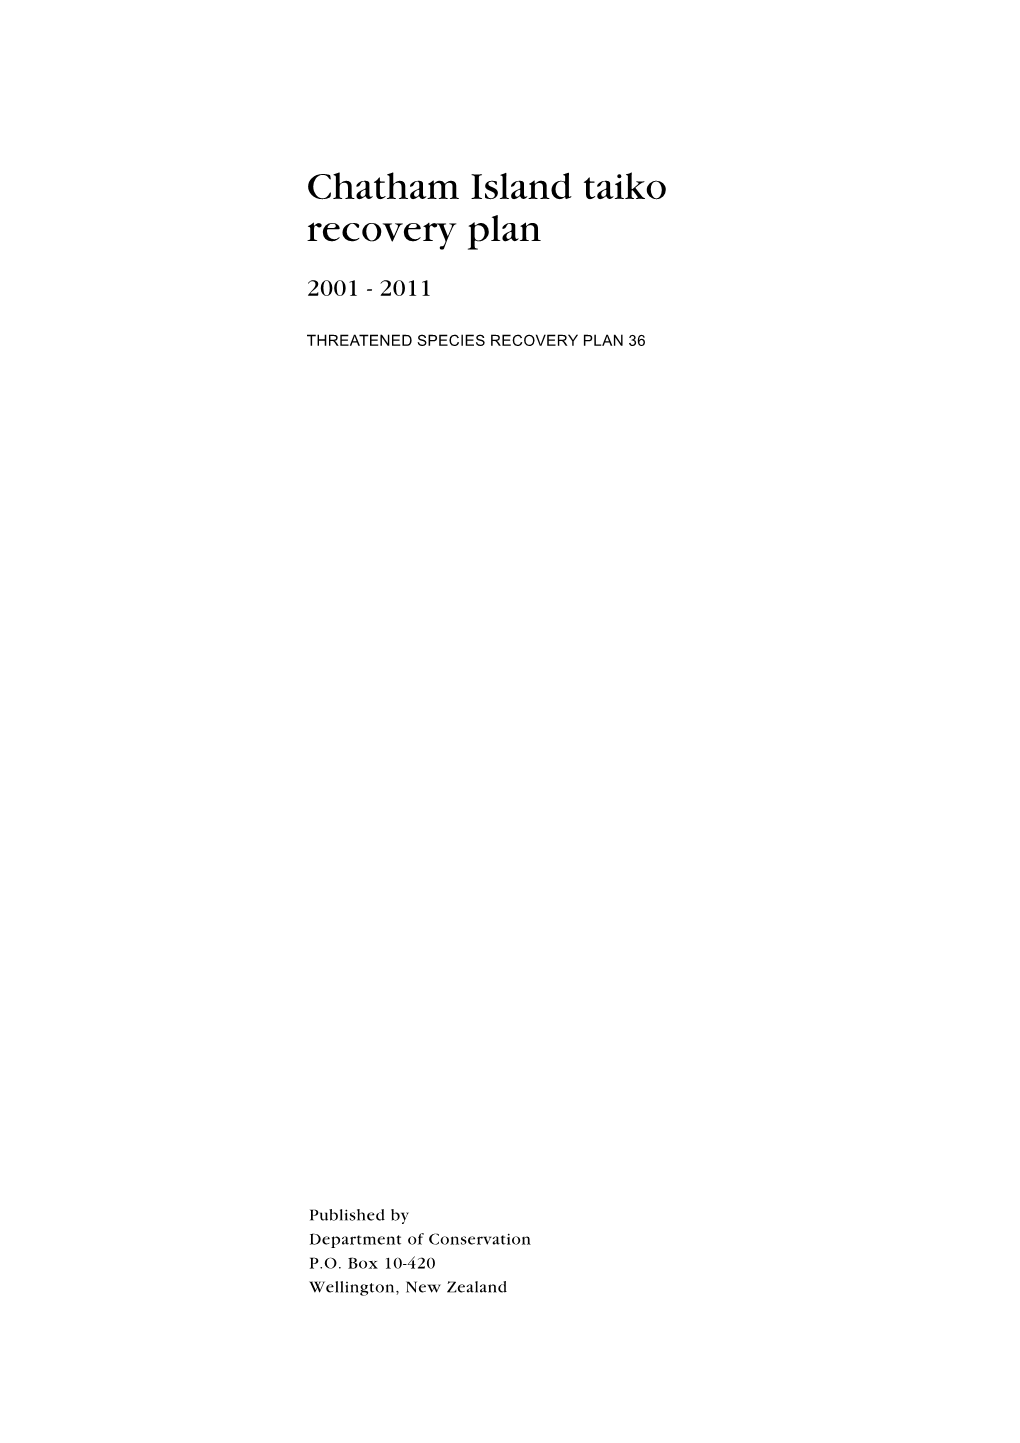 Chatham Island Taiko Recovery Plan 2001-2011